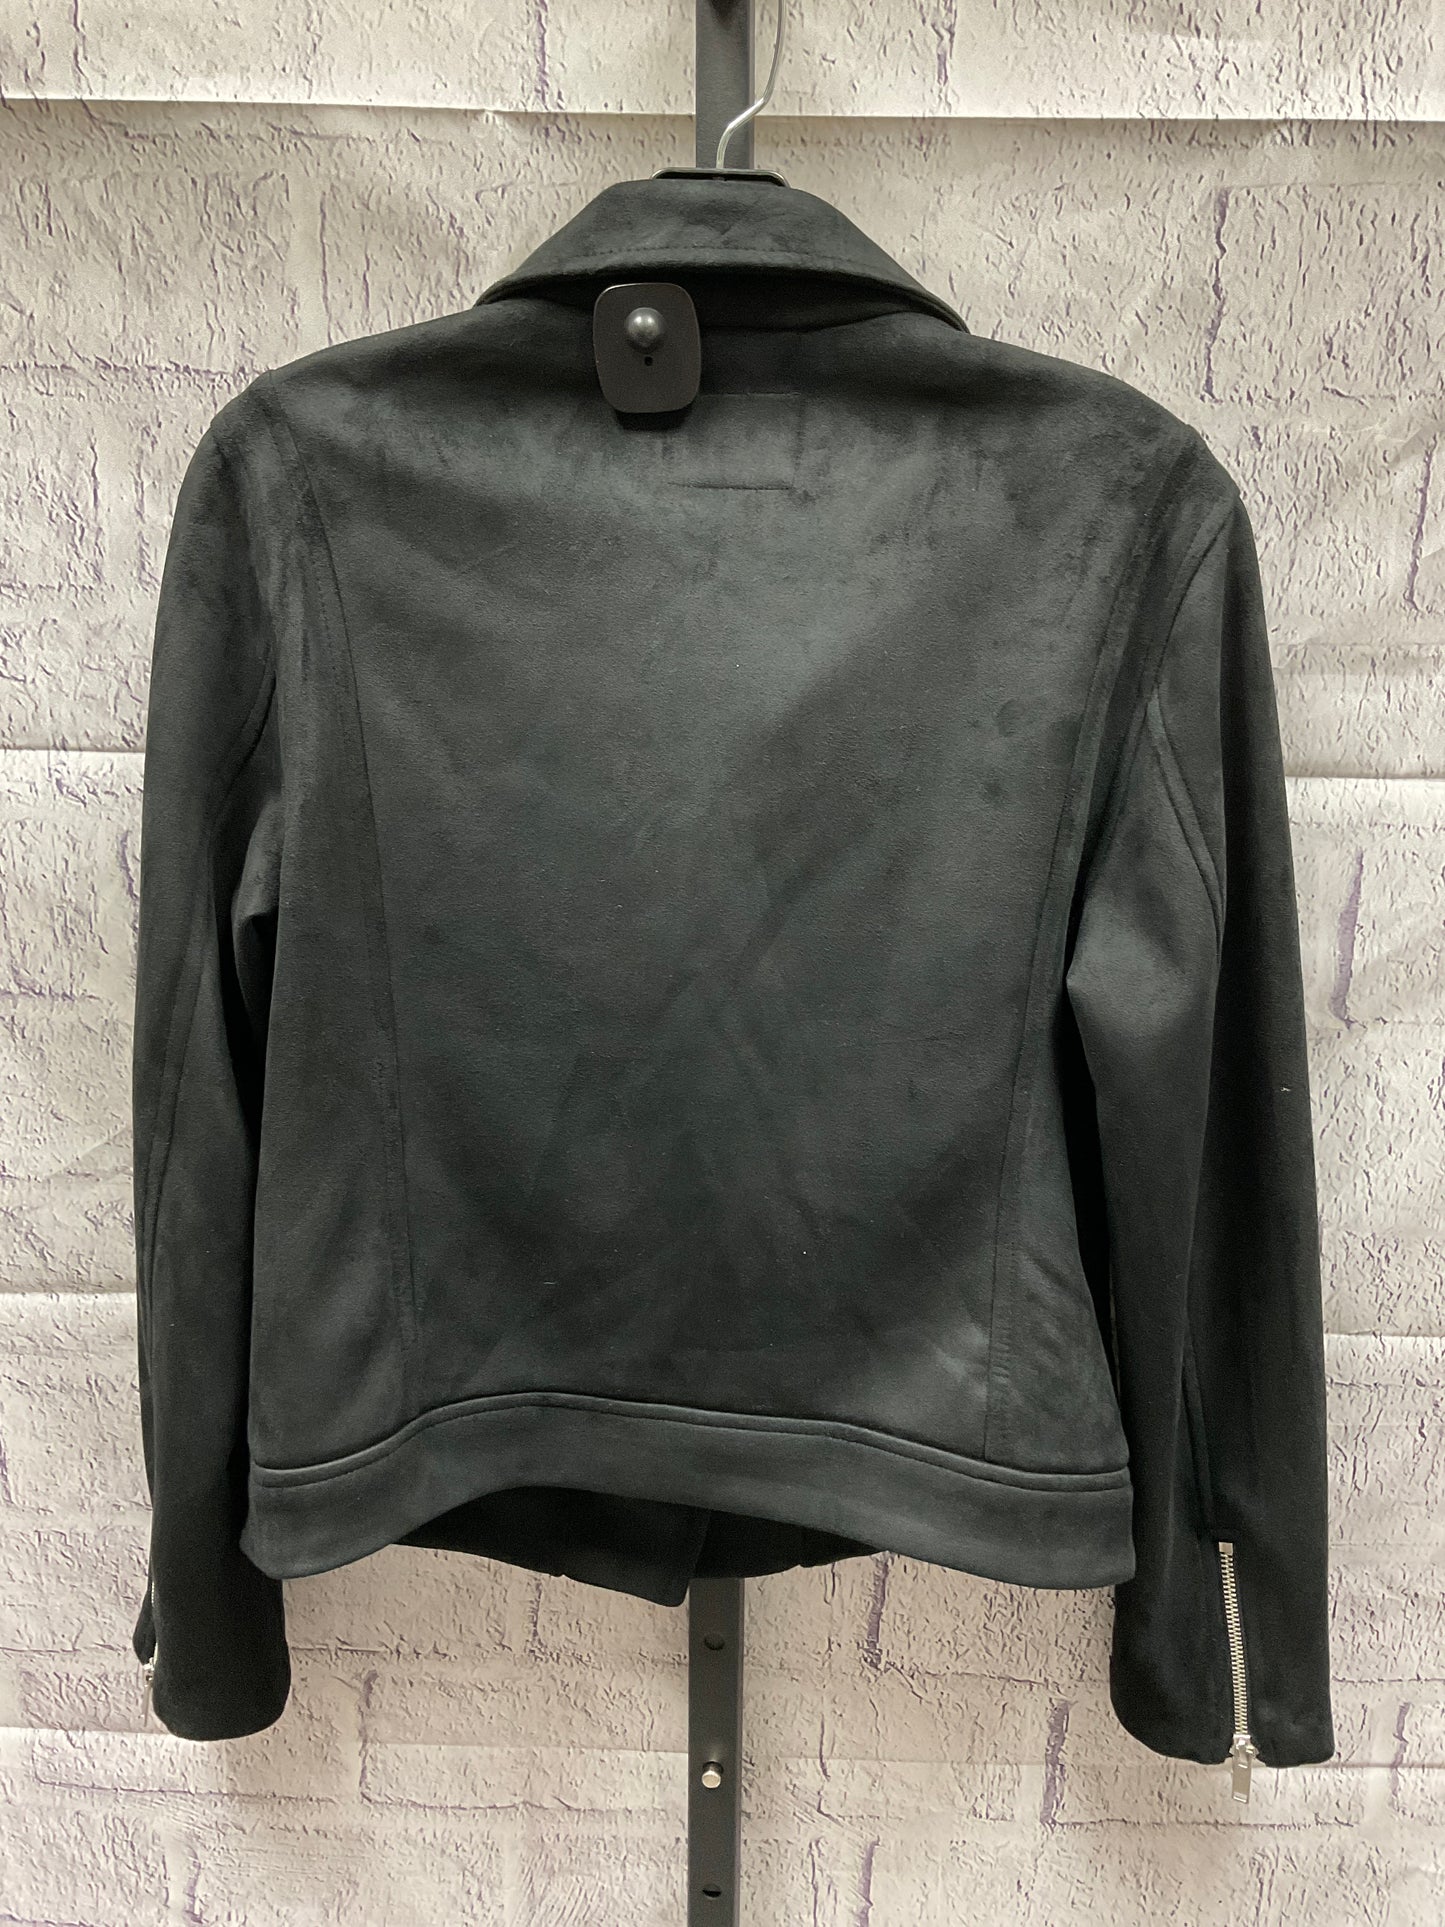 Jacket Moto By Old Navy  Size: S